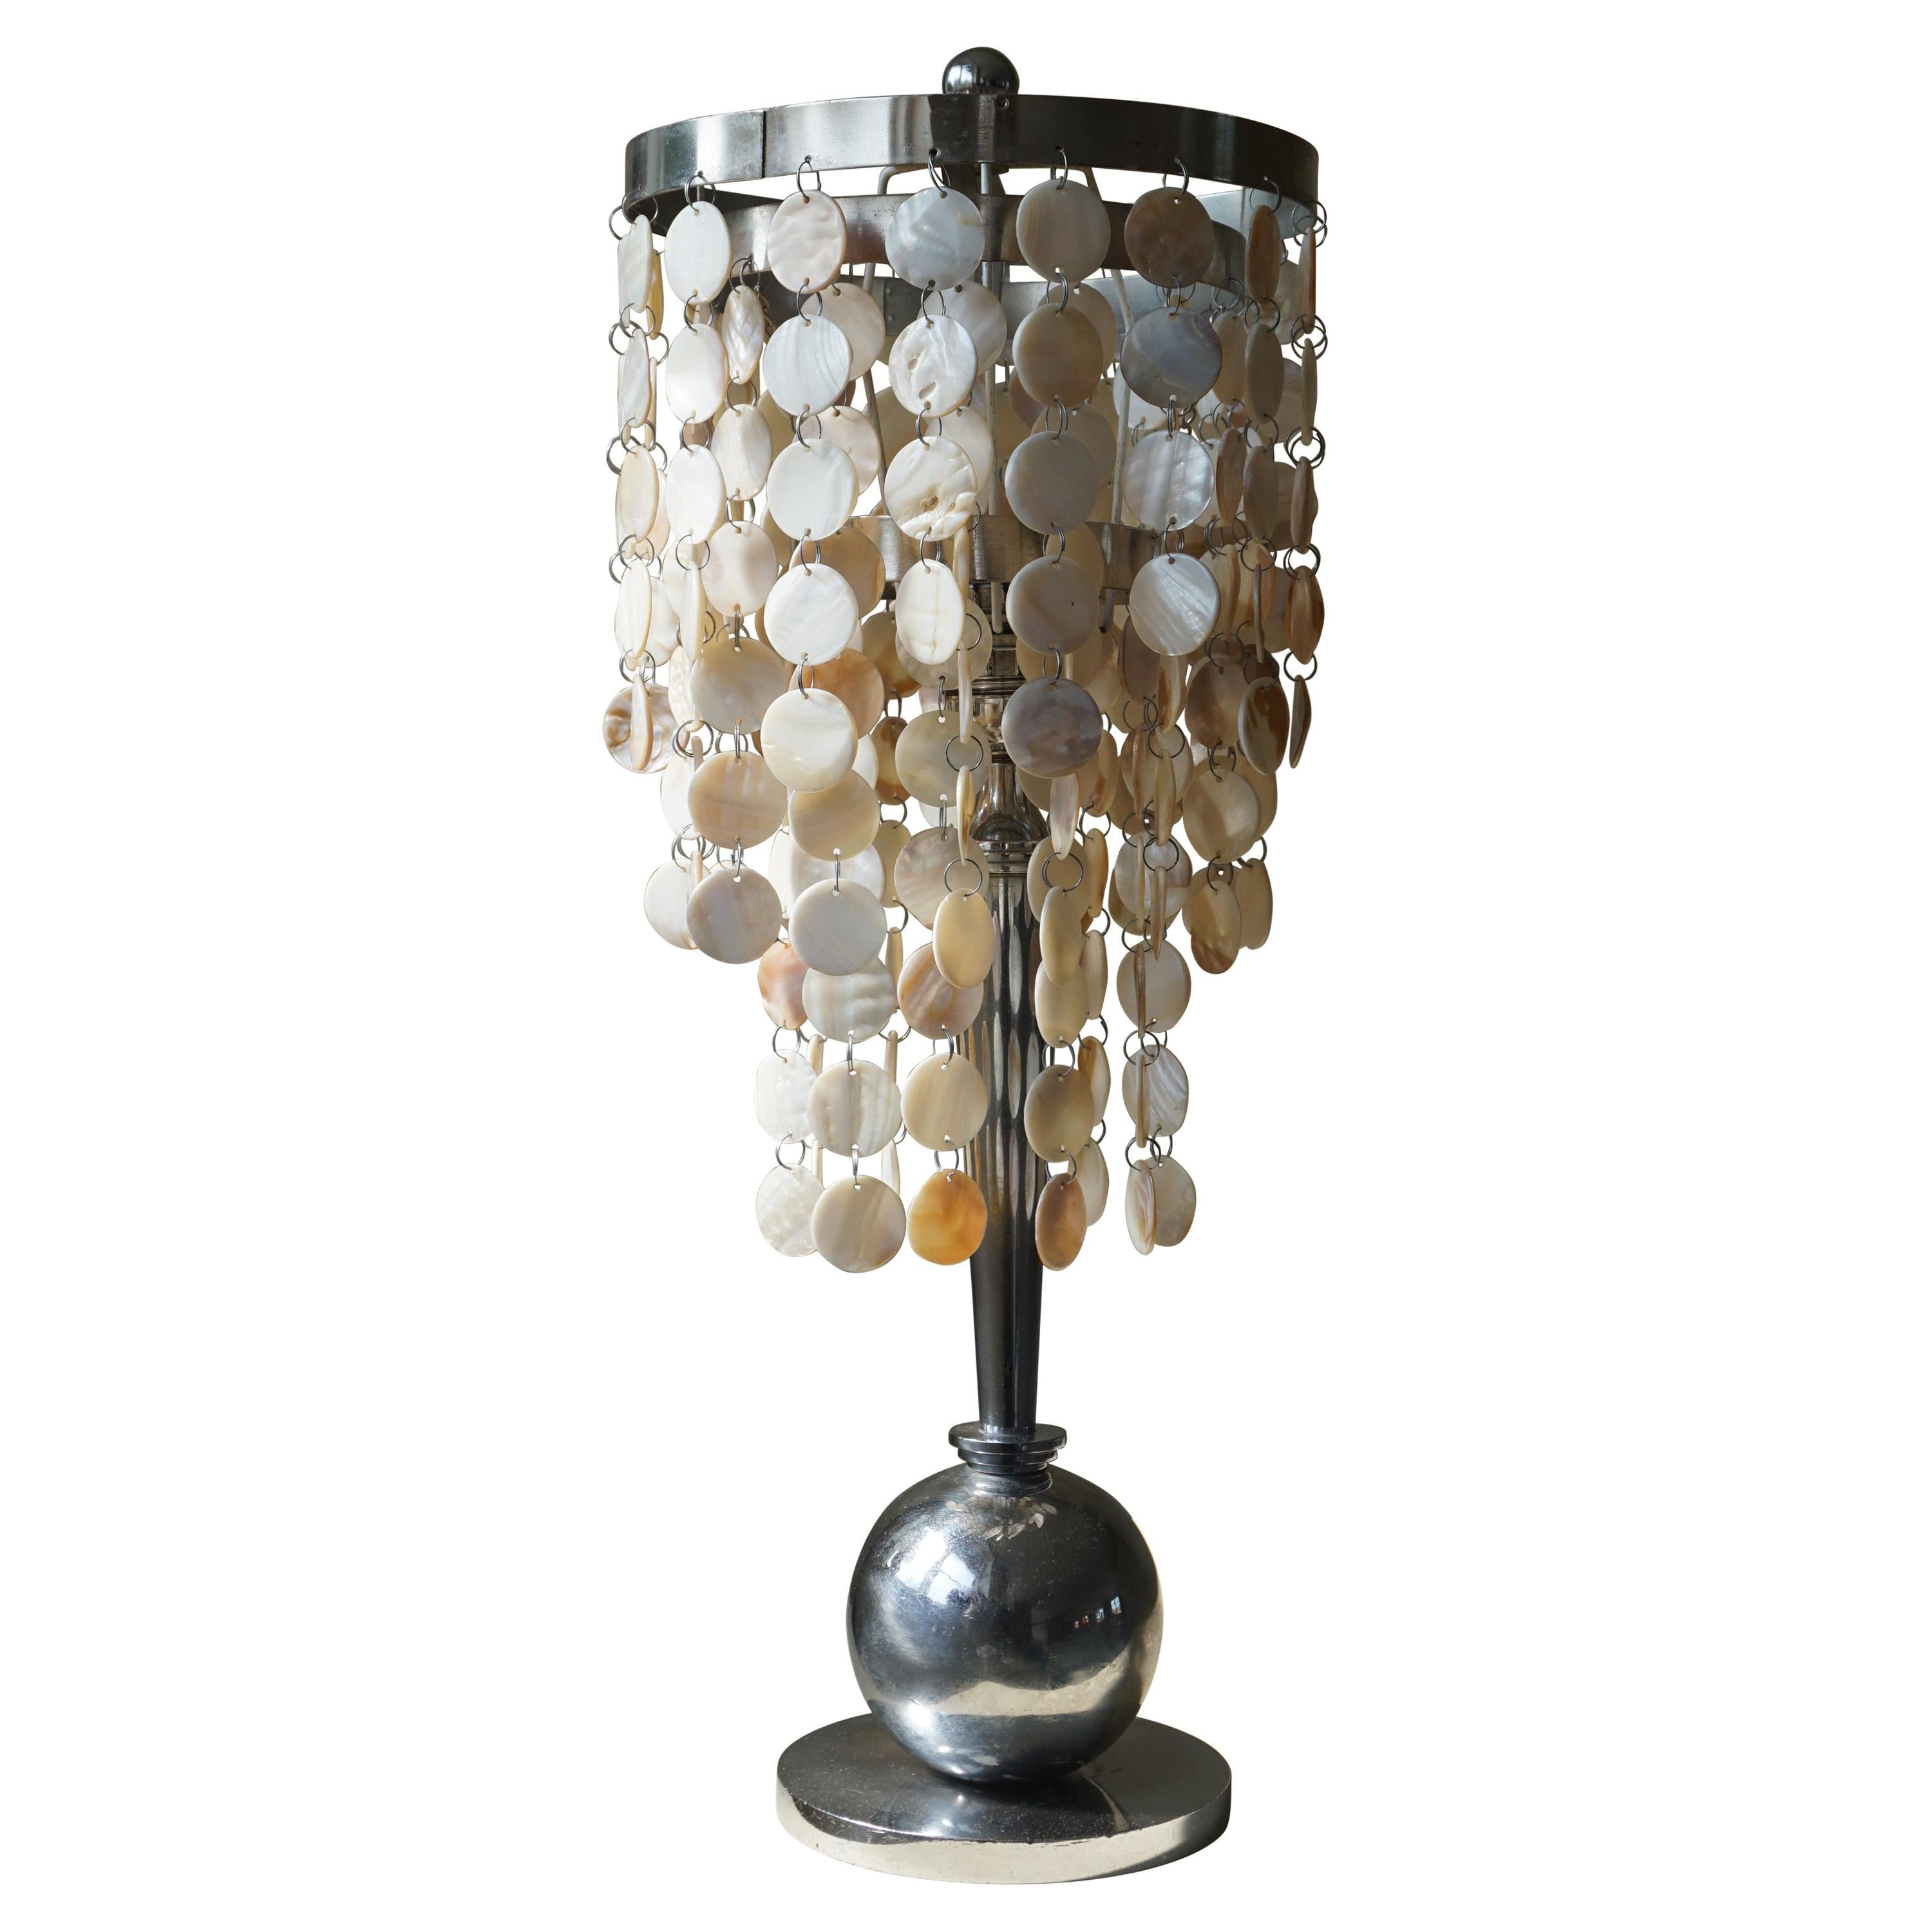 Art Deco Table Lamp with Mother of Pearls Top and Funkis Style Frame